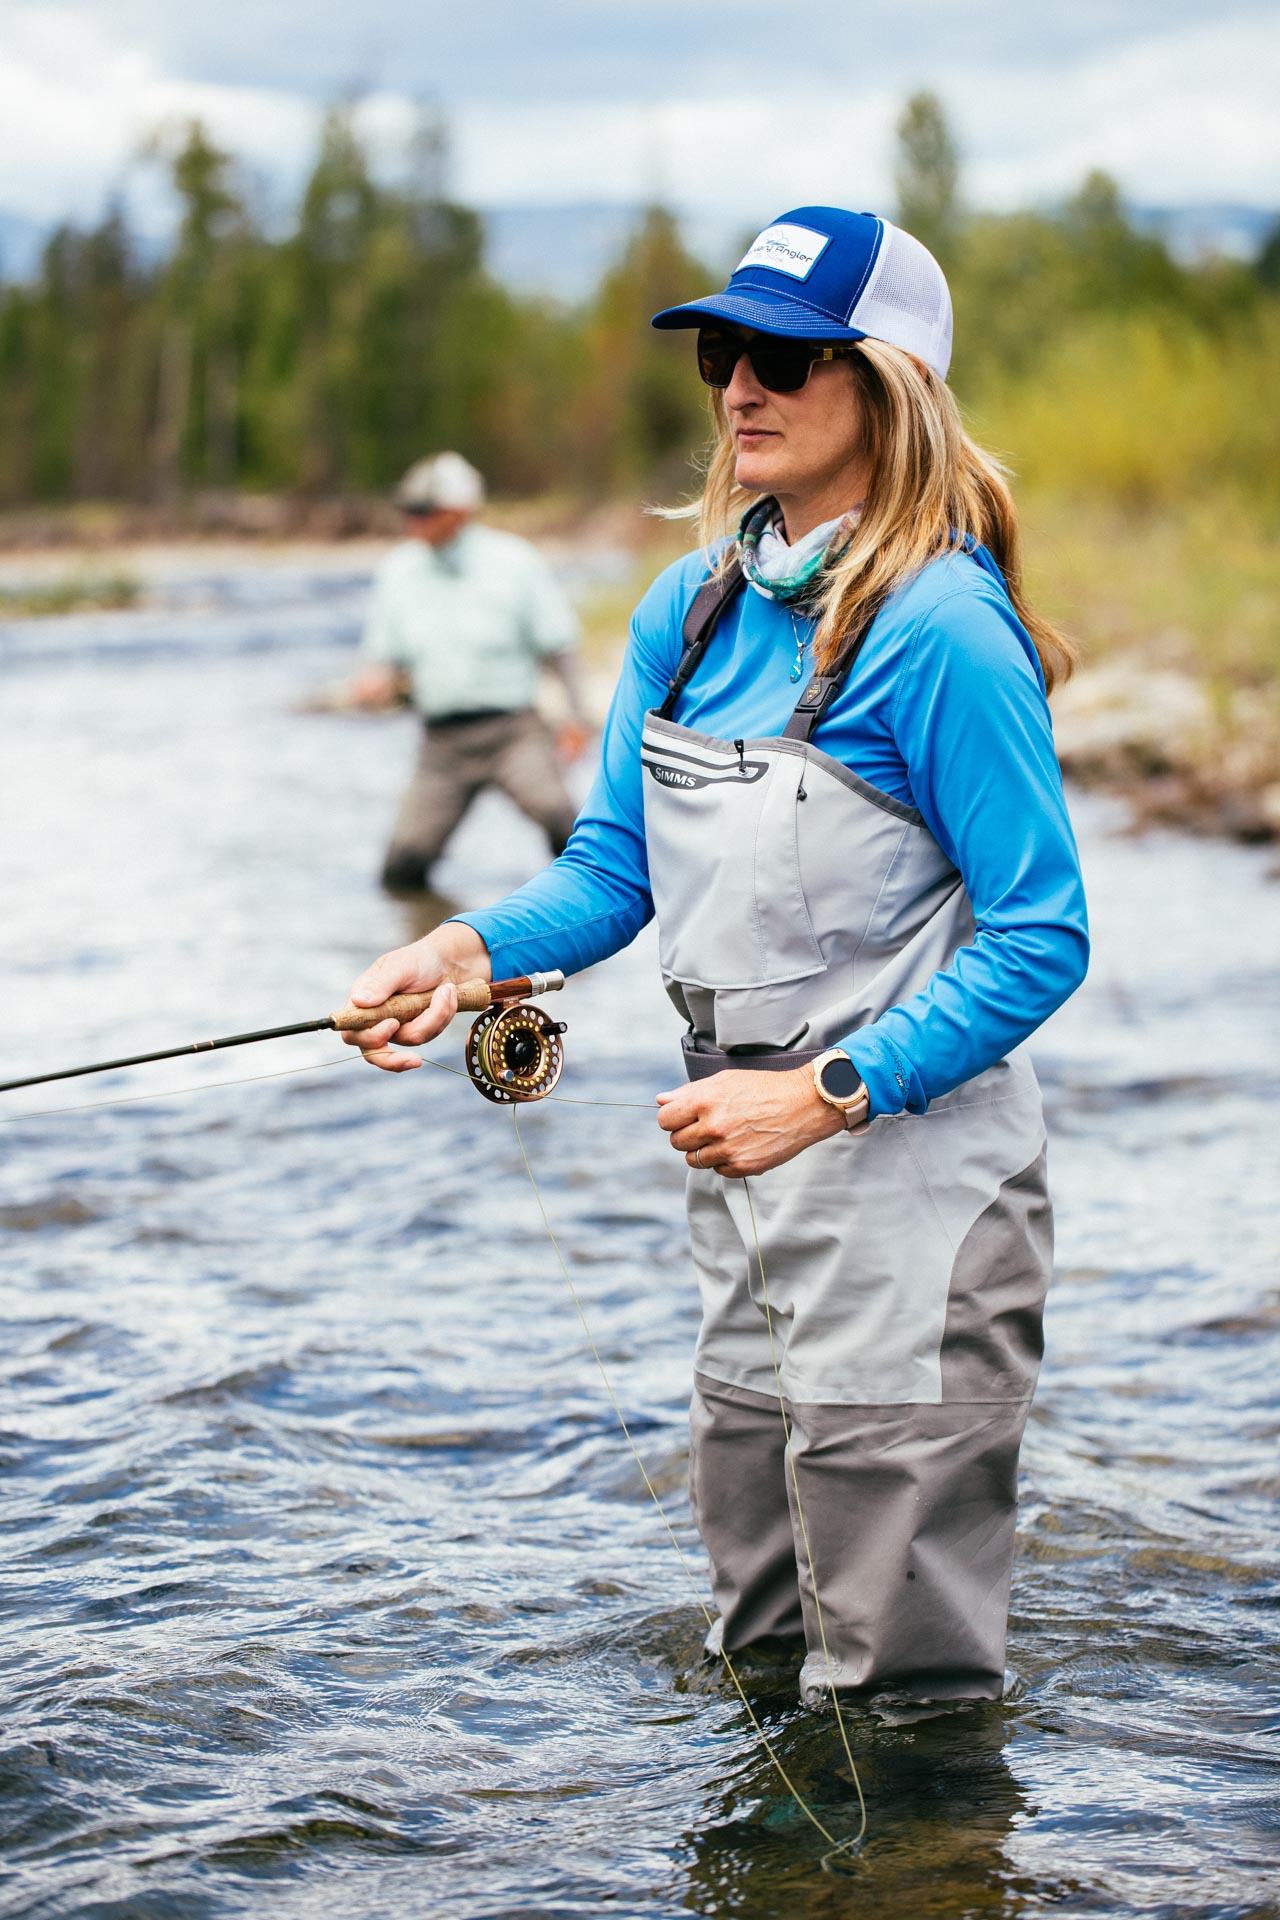 Start fly fishing a good way to cast time away